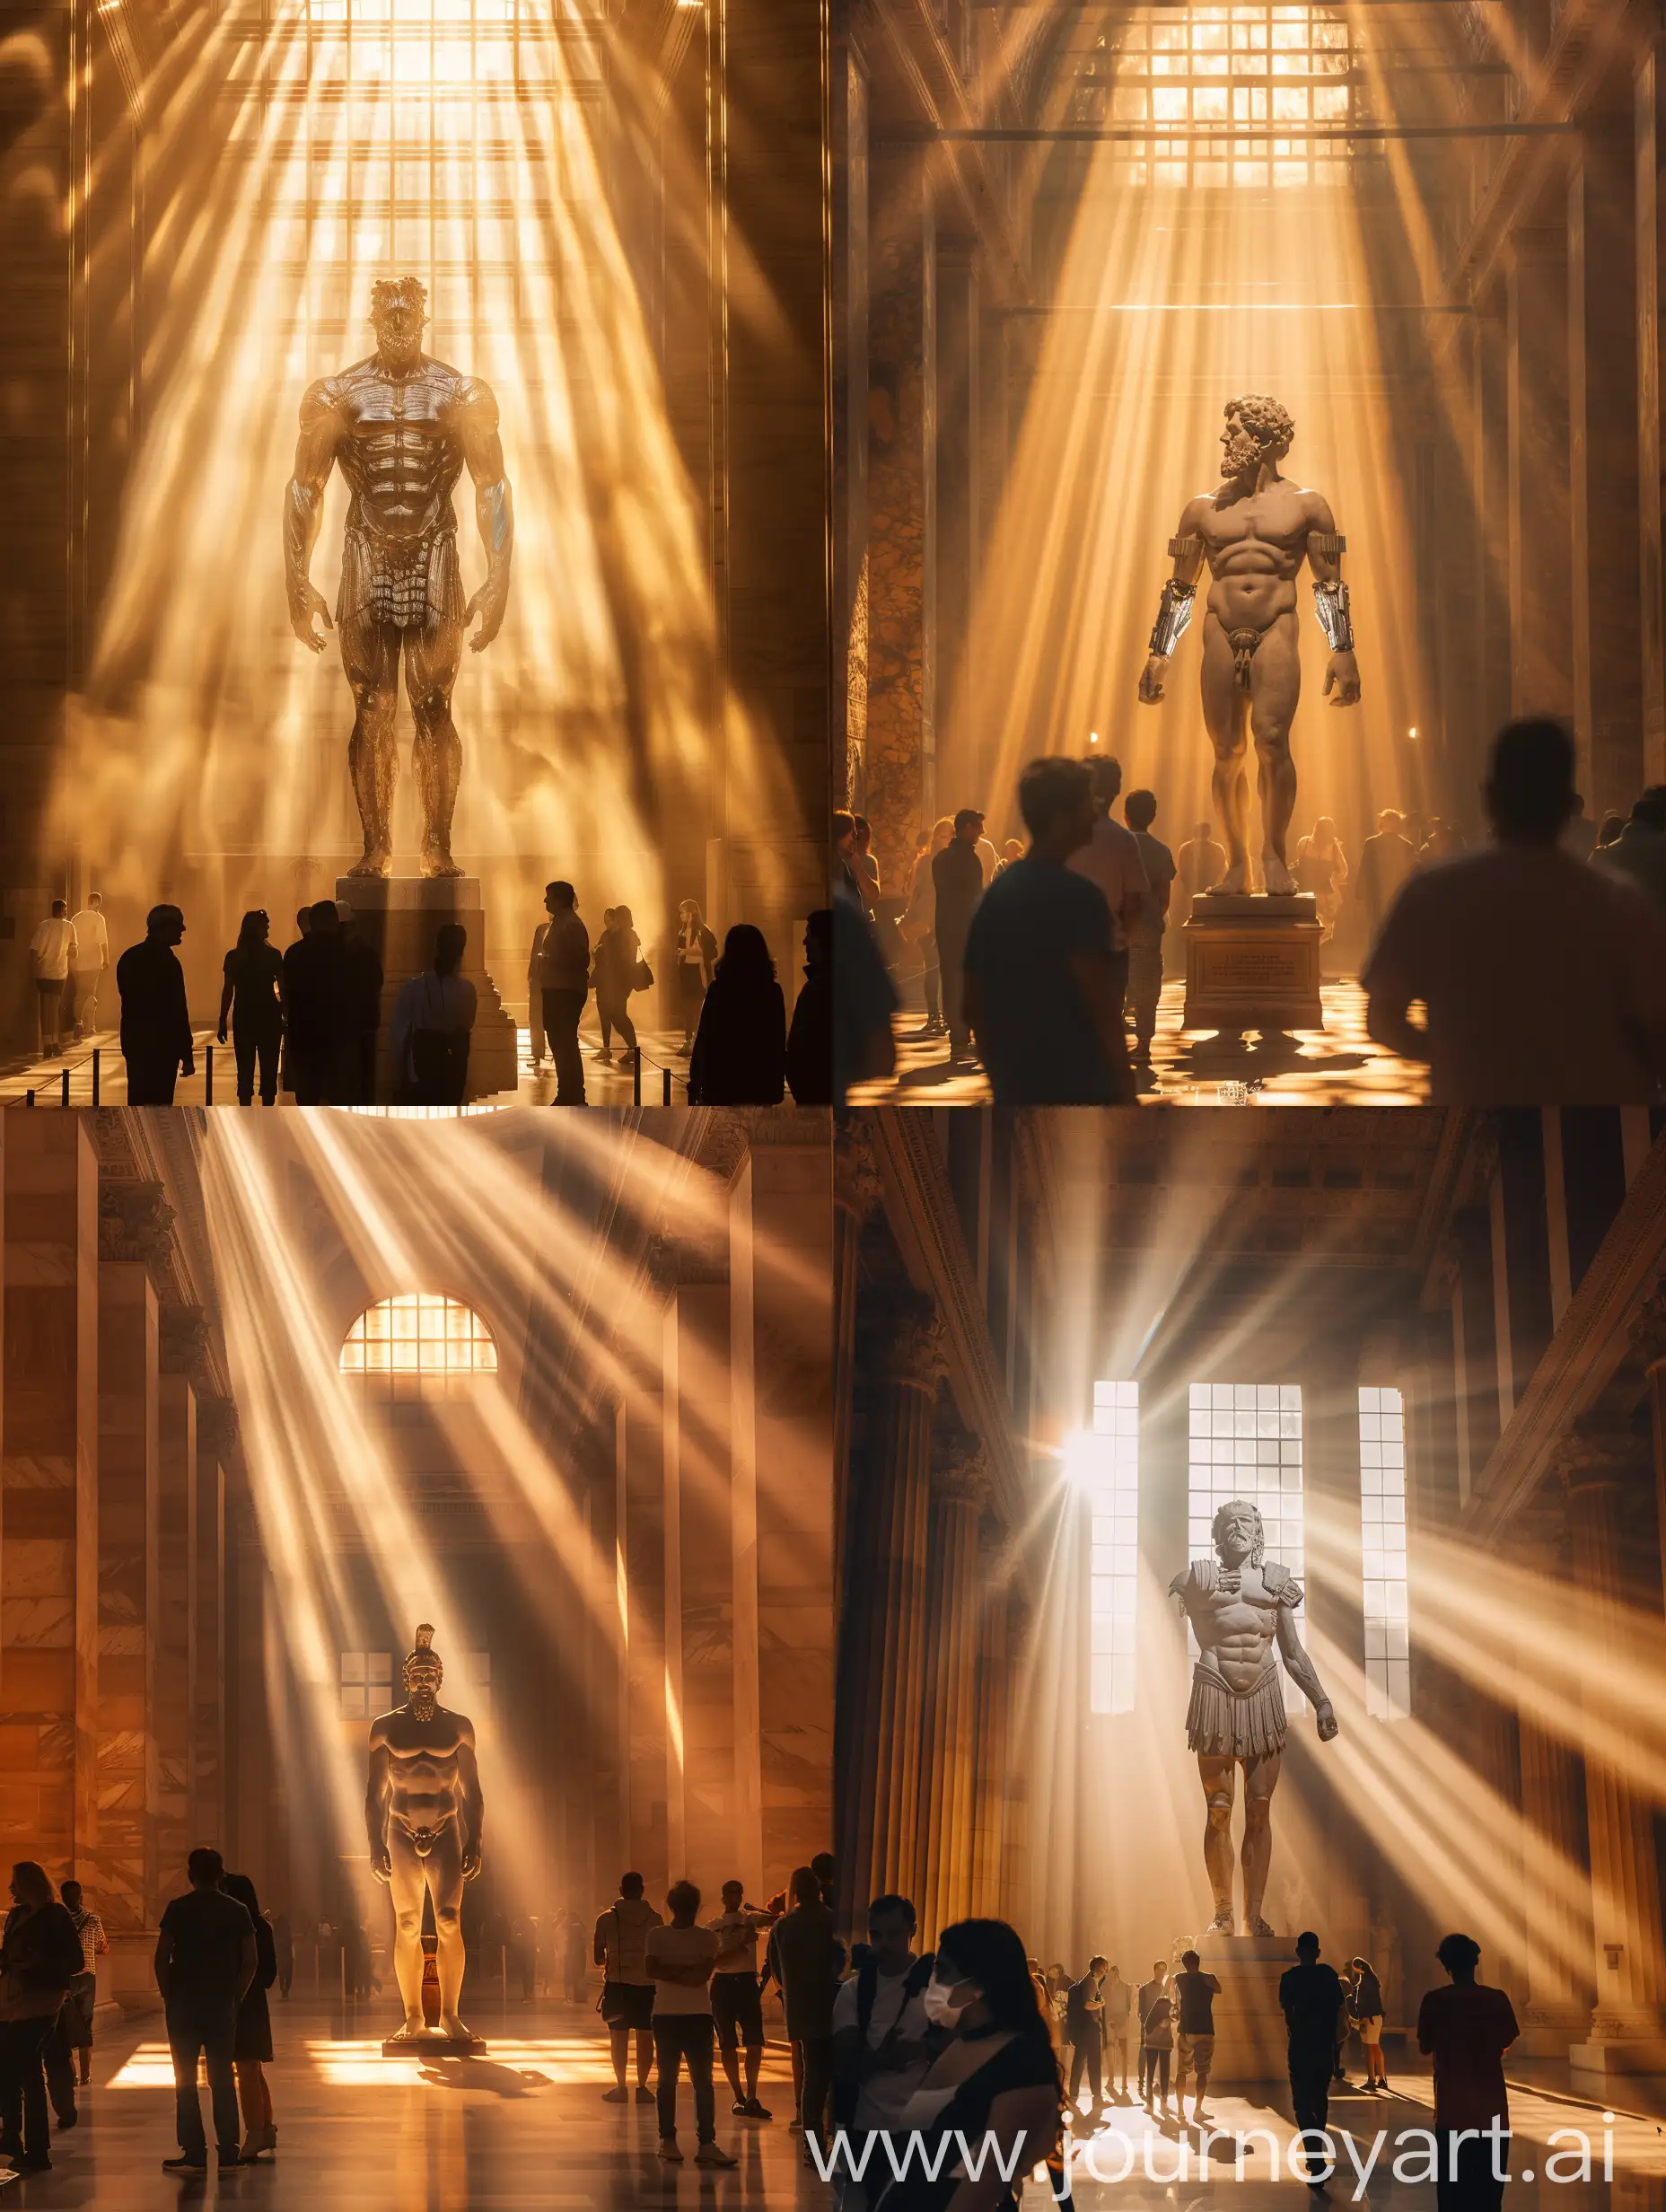 In the museum's majestic hall, the golden light of the setting sun bathes the space, creating a divine and ethereal atmosphere. Rays of light filter through tall windows, casting intricate patterns of shadows over ancient artworks and awestruck spectators. At the center of the hall, the sculpture of Zeus emerges as an imposing and transcendental figure, shrouded in an aura of mystery and power.

The camera captures the moment with a cinematic perspective, framing Zeus amidst the celestial beauty that surrounds him. Soft light highlights every detail of the sculpture, from perfectly sculpted muscles to the traces of the cybernetic helmet that adorn his majestic figure. The silent atmosphere is permeated by the reverent murmur of visitors, whose illuminated faces reflect the awe before the celestial artwork in front of them.

As the camera elegantly moves through the space, capturing stunning angles and details, soft and ethereal music fills the air, further elevating the sense of reverence and admiration. This cinematic photograph transports viewers to a world where art meets divinity, and every moment is a tribute to the greatness of the human and the divine.